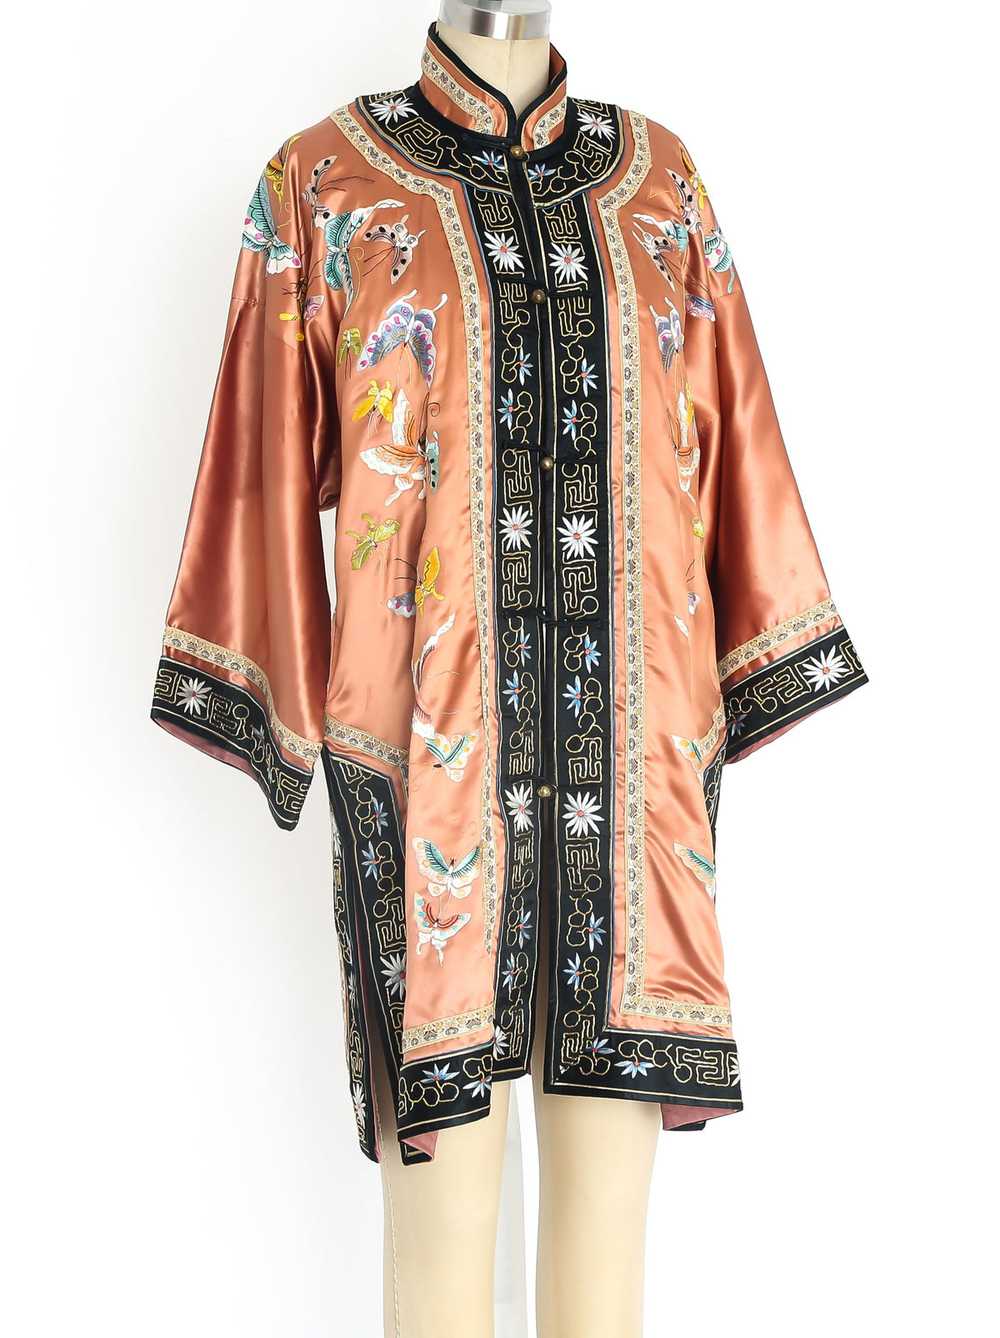 Hand Embroidered Chinese Silk Robe - image 4